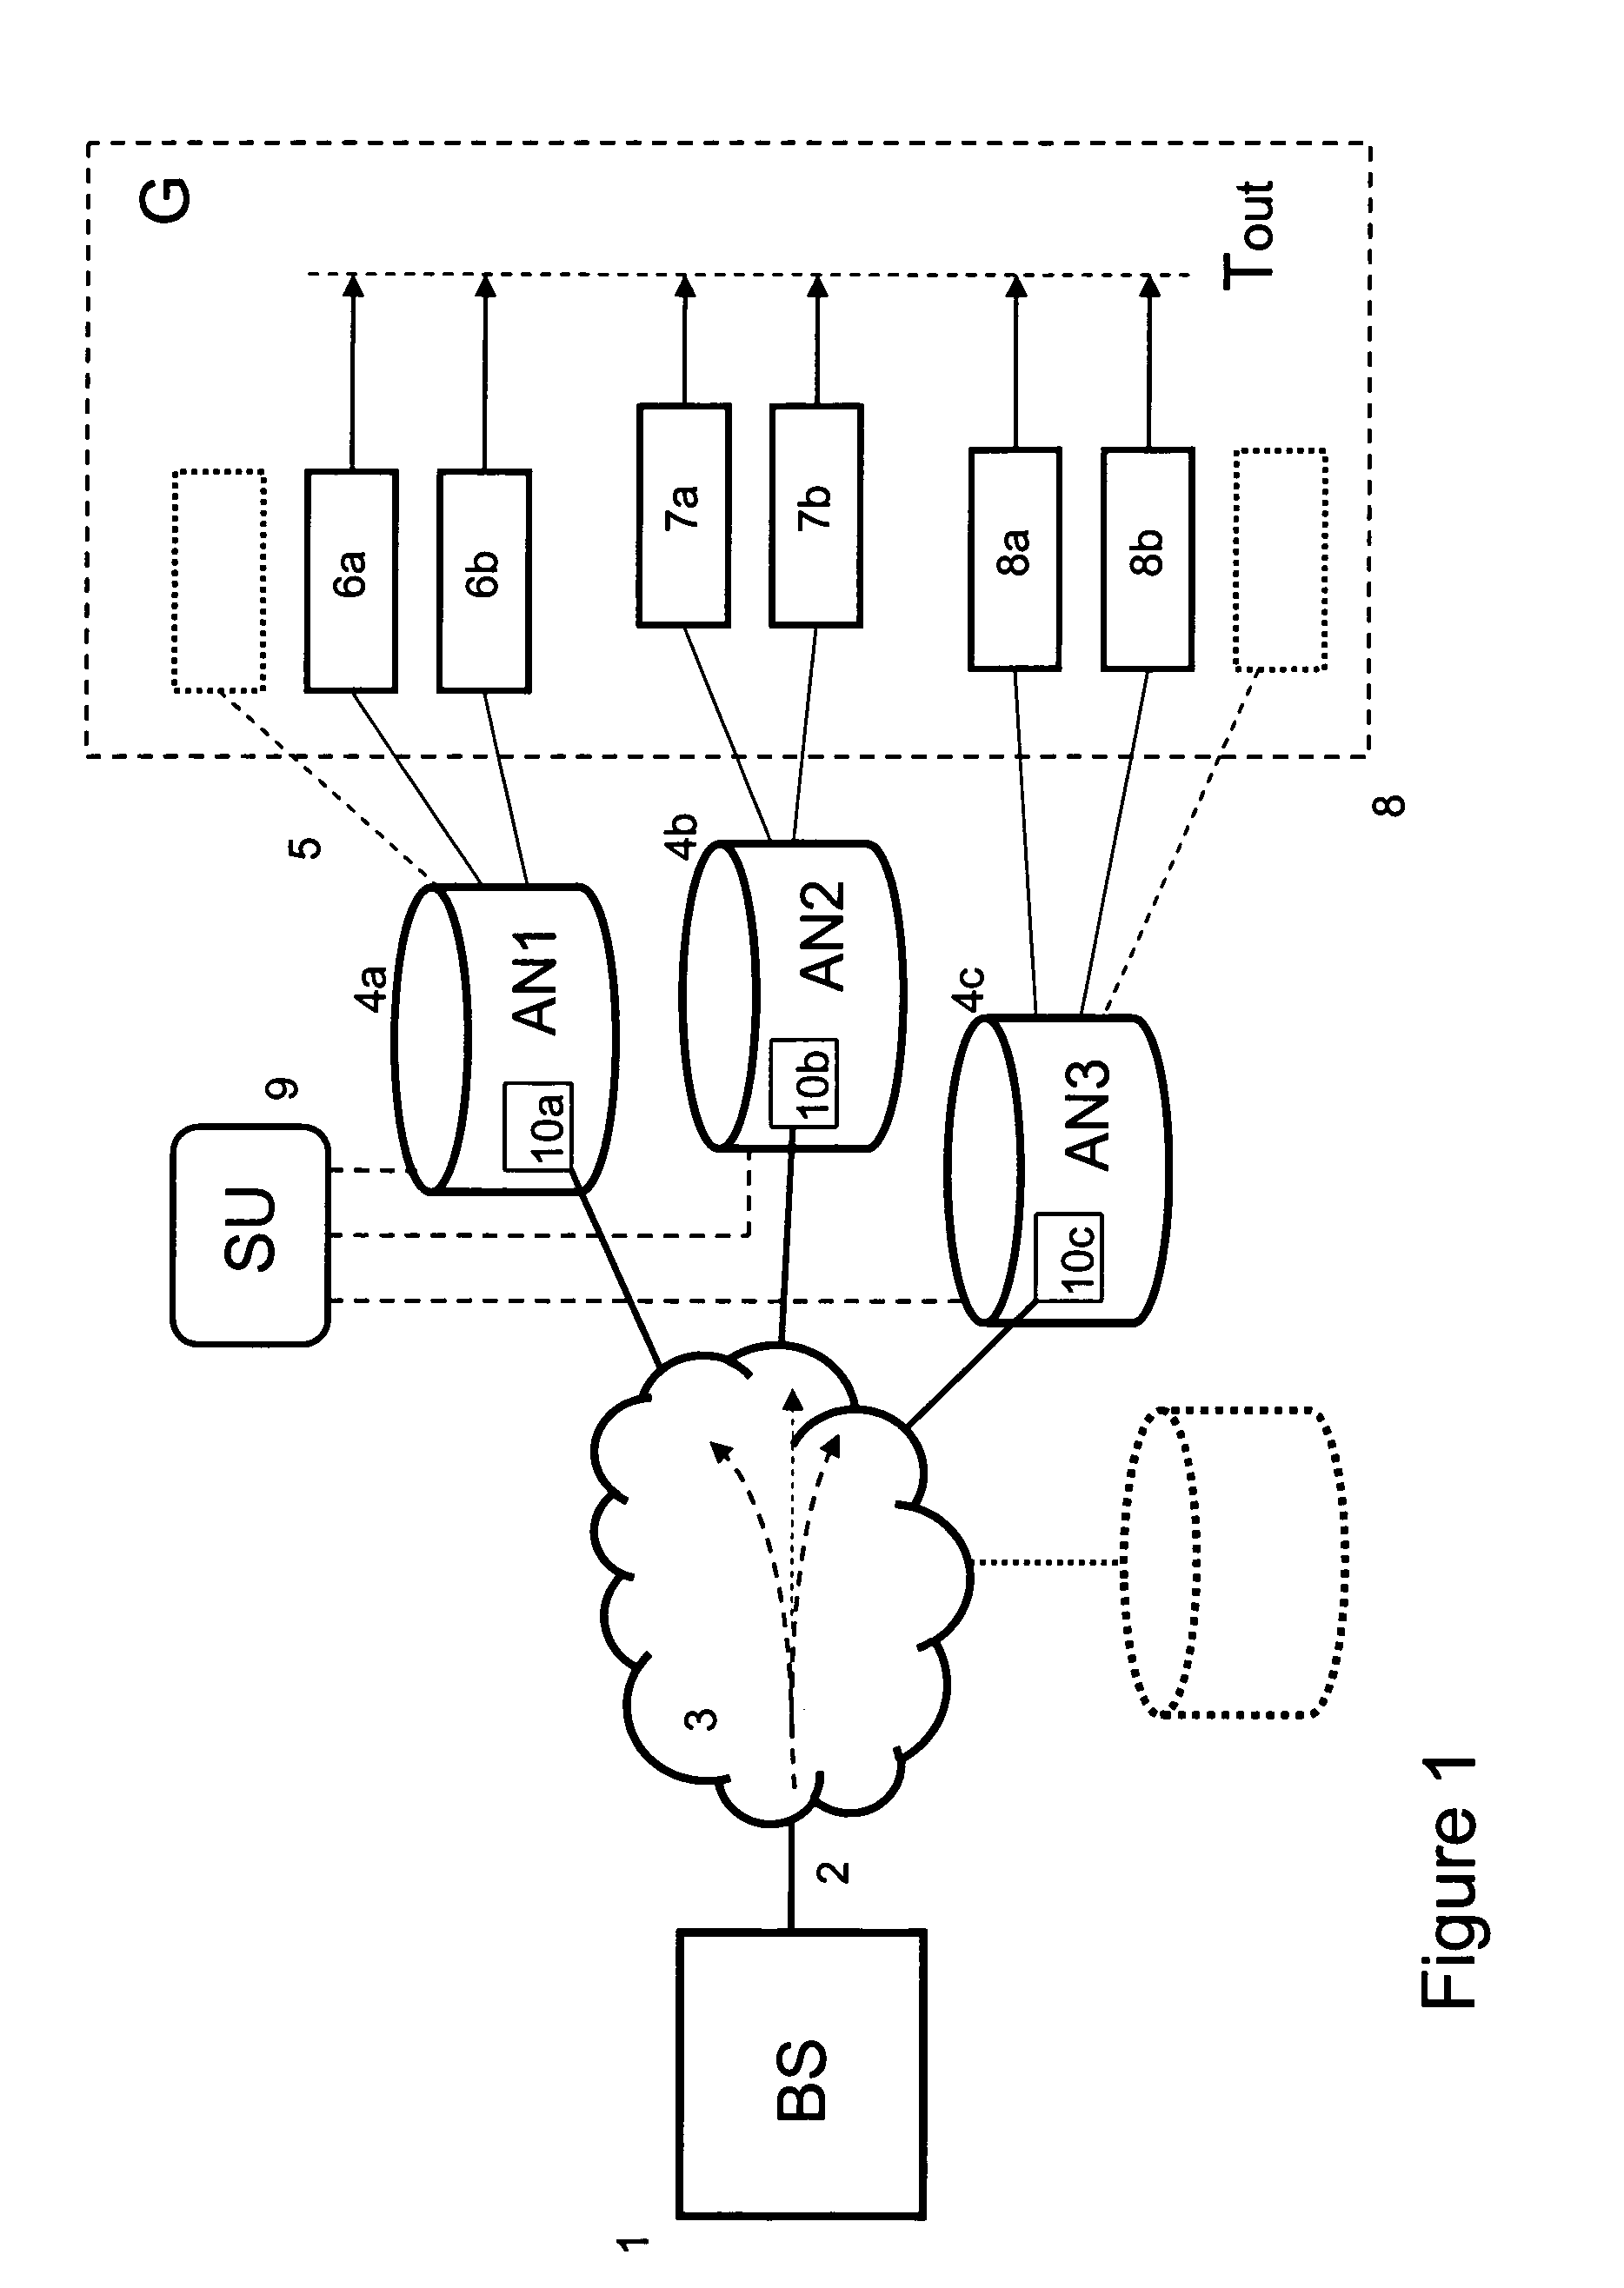 Method and System for Synchronizing a Group of End-Terminals